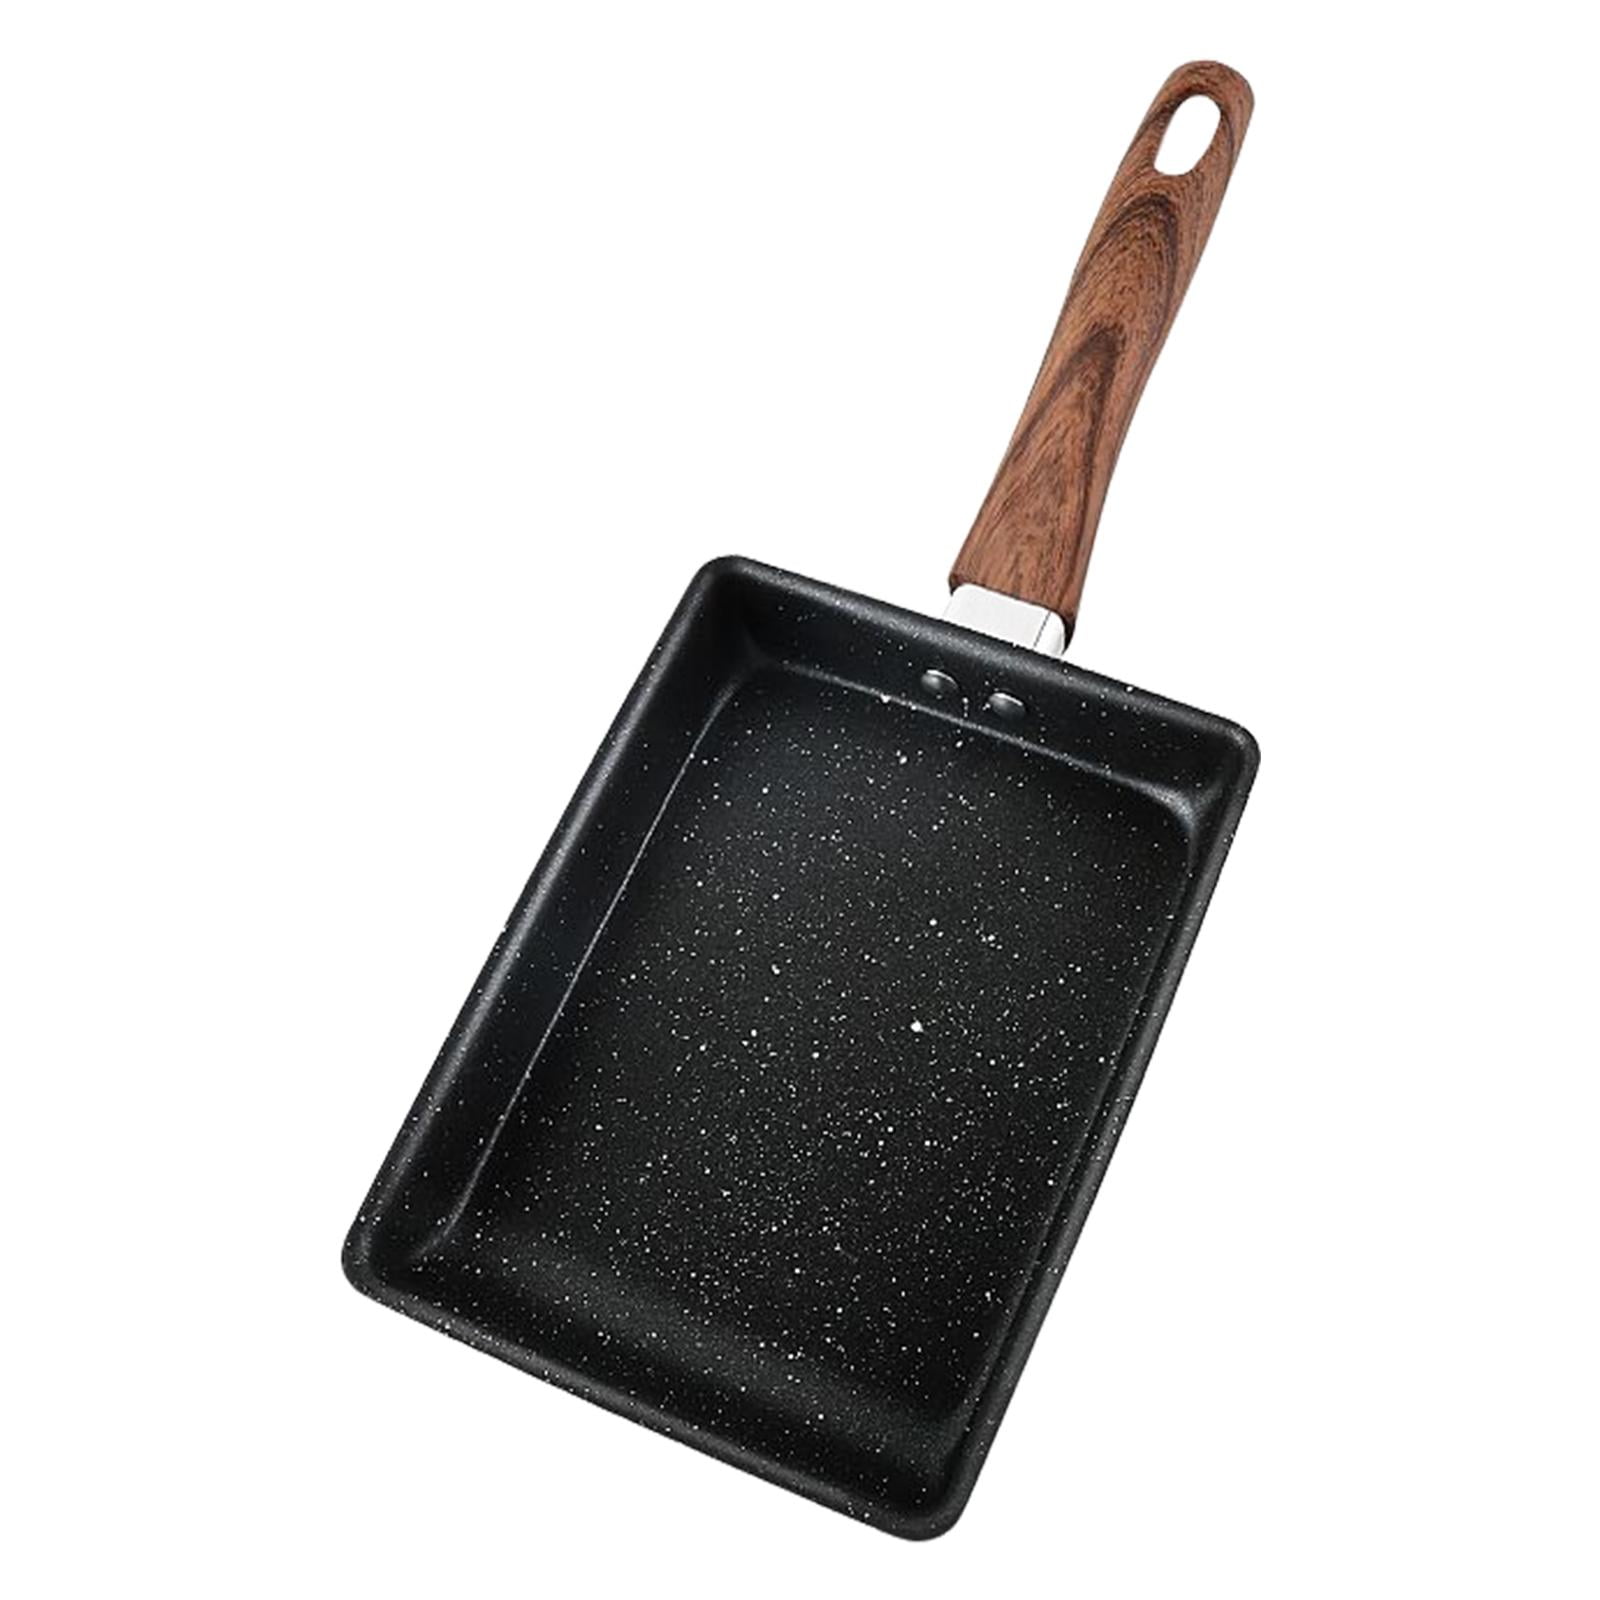 Square Frying Food Pan Japanese Omelette Egg Roll Cooker Cookware Non-Stick 